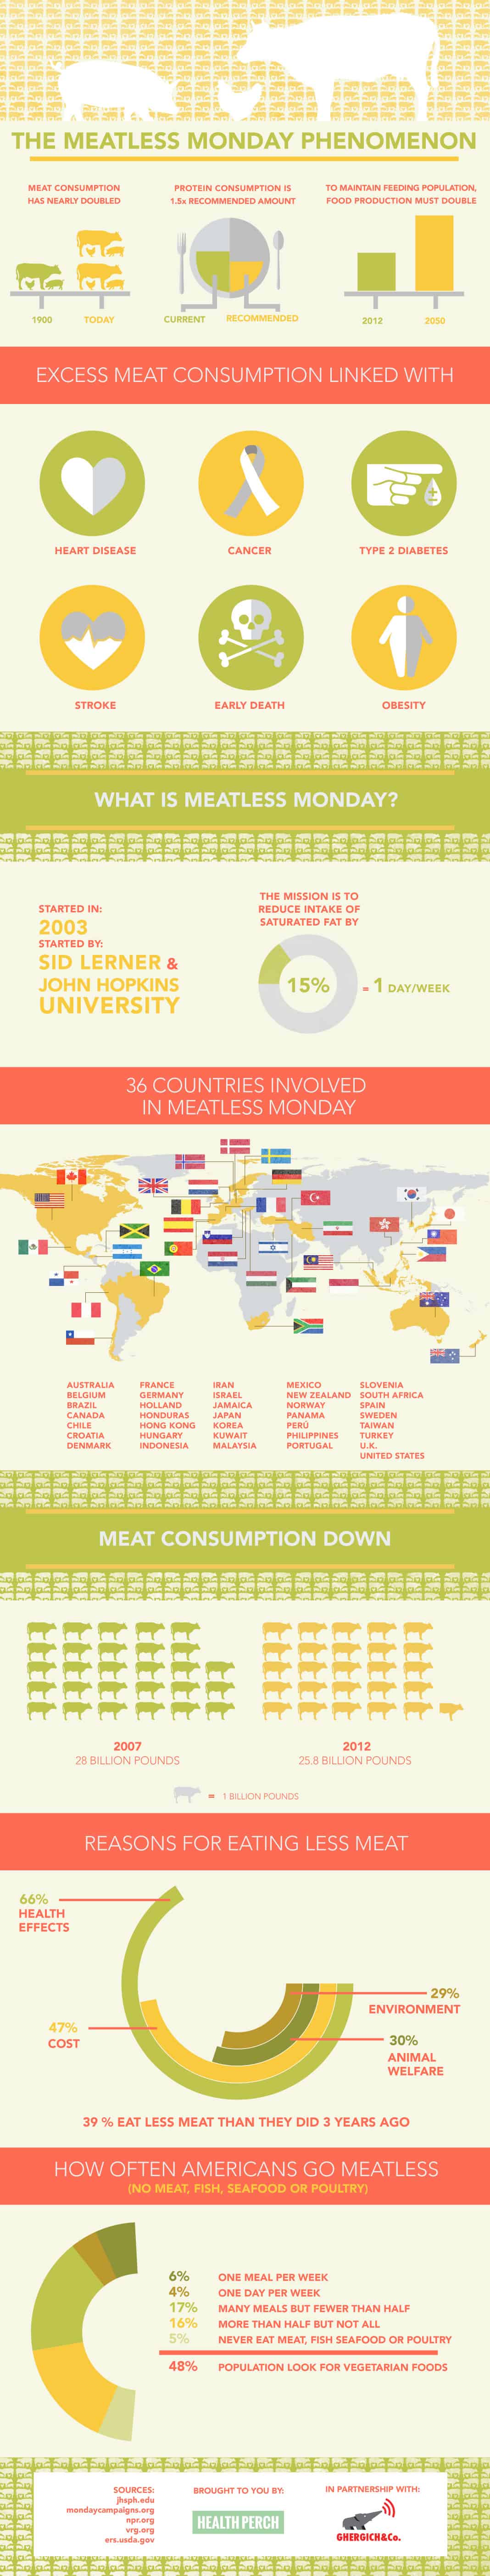 Meatless Monday Infographic - Find out the history, countries involved and purpose of Meatless Monday